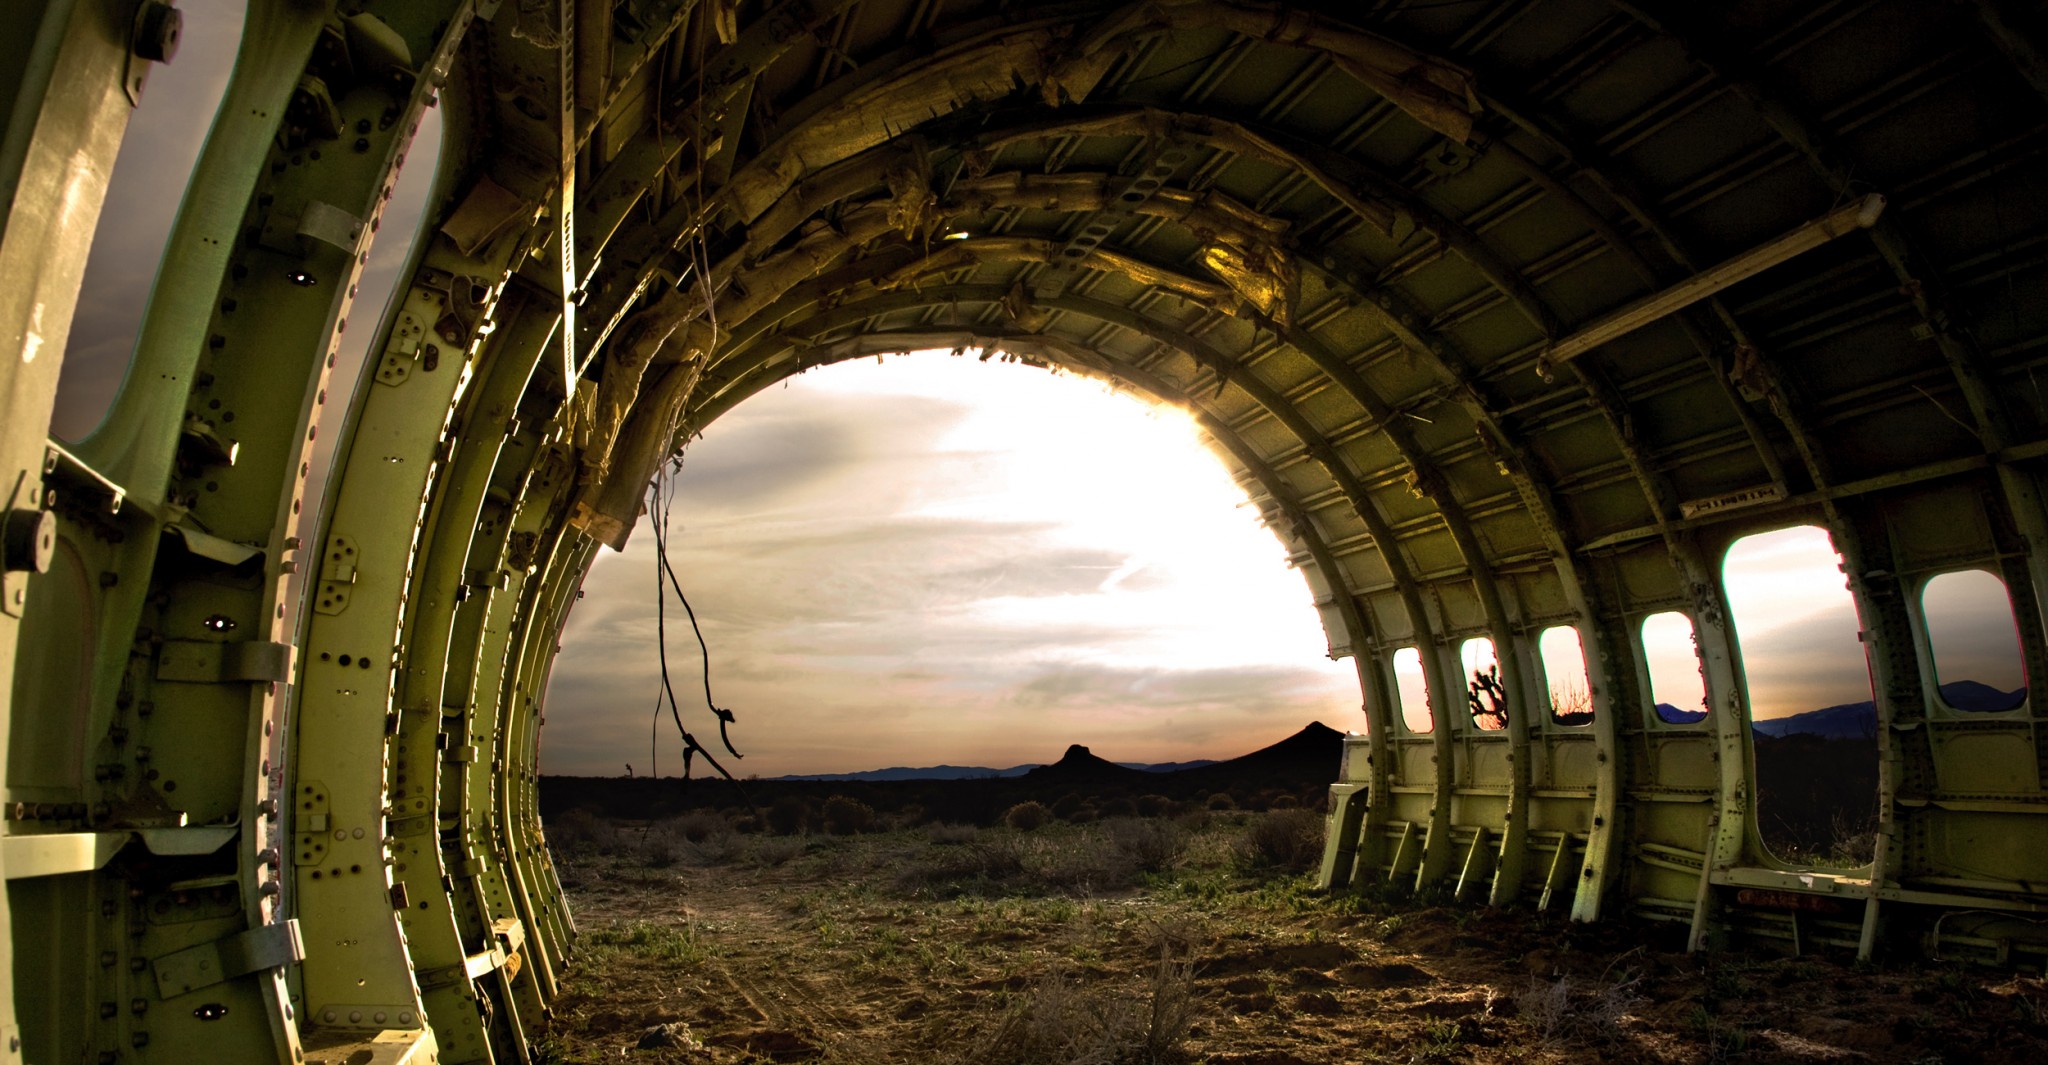 UltimateGraveyard plane shell in Mojave Desert. Available for filming, photography productions.